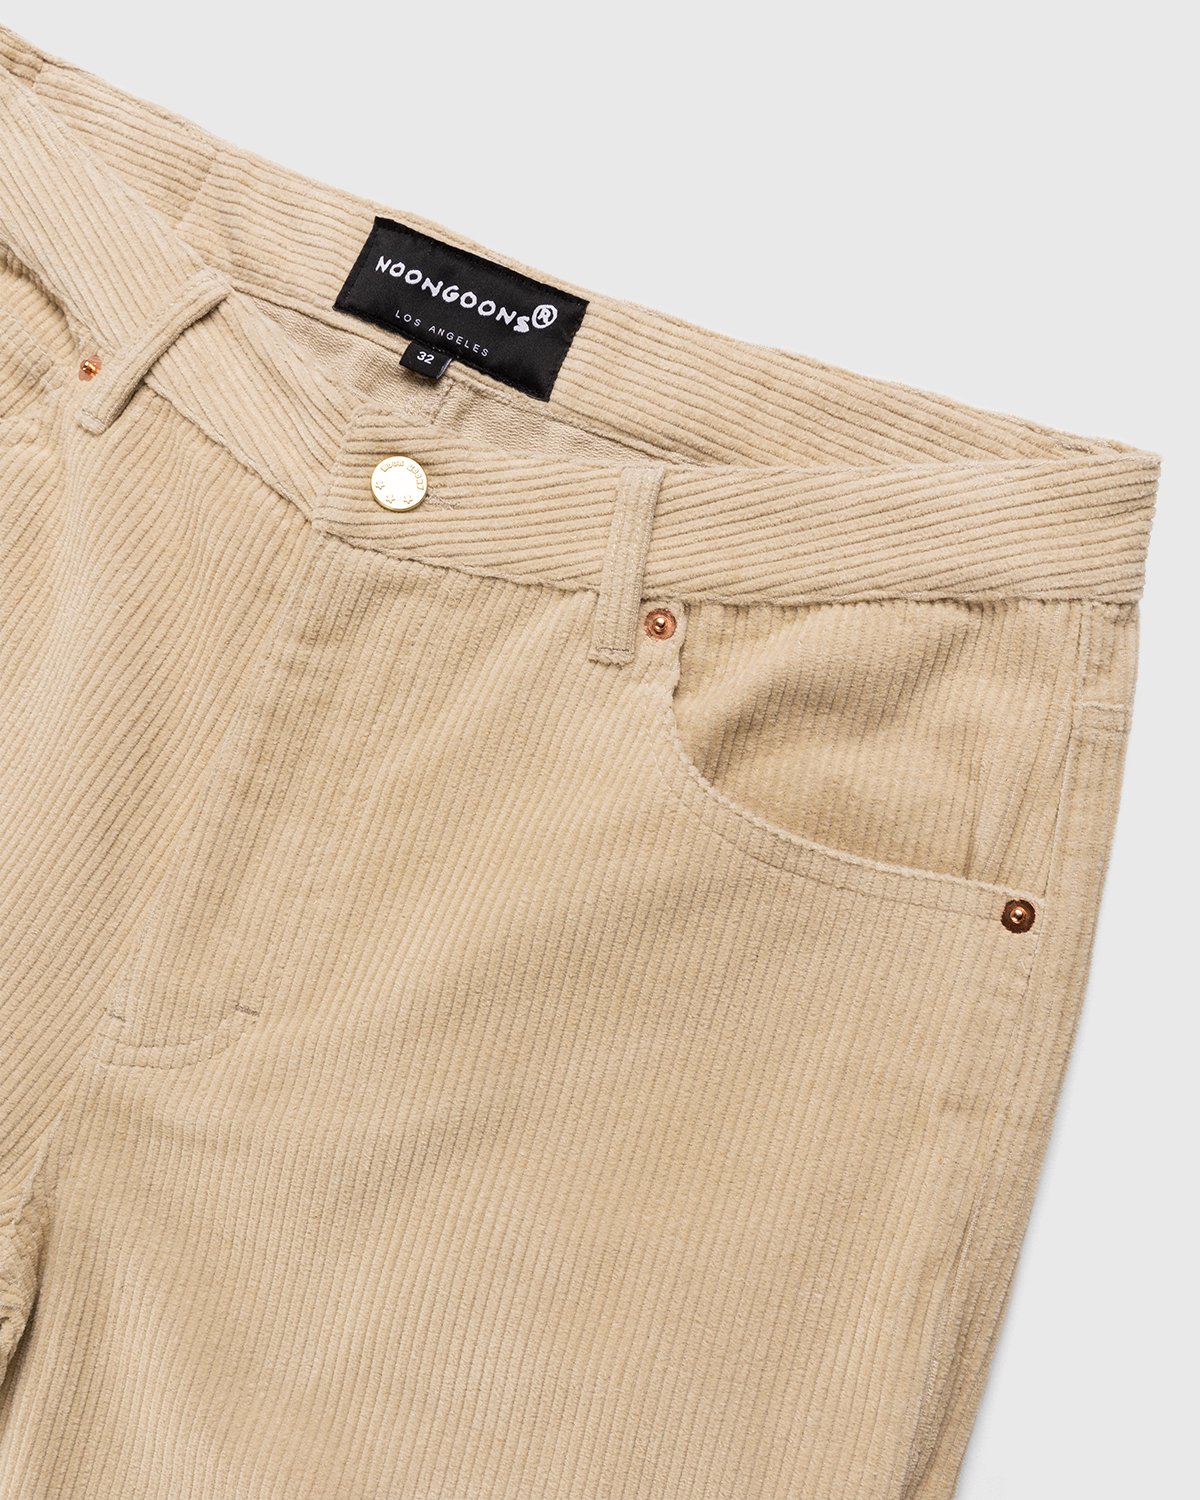 Noon Goons - Sublime Cord Short Overcast - Clothing - Beige - Image 3